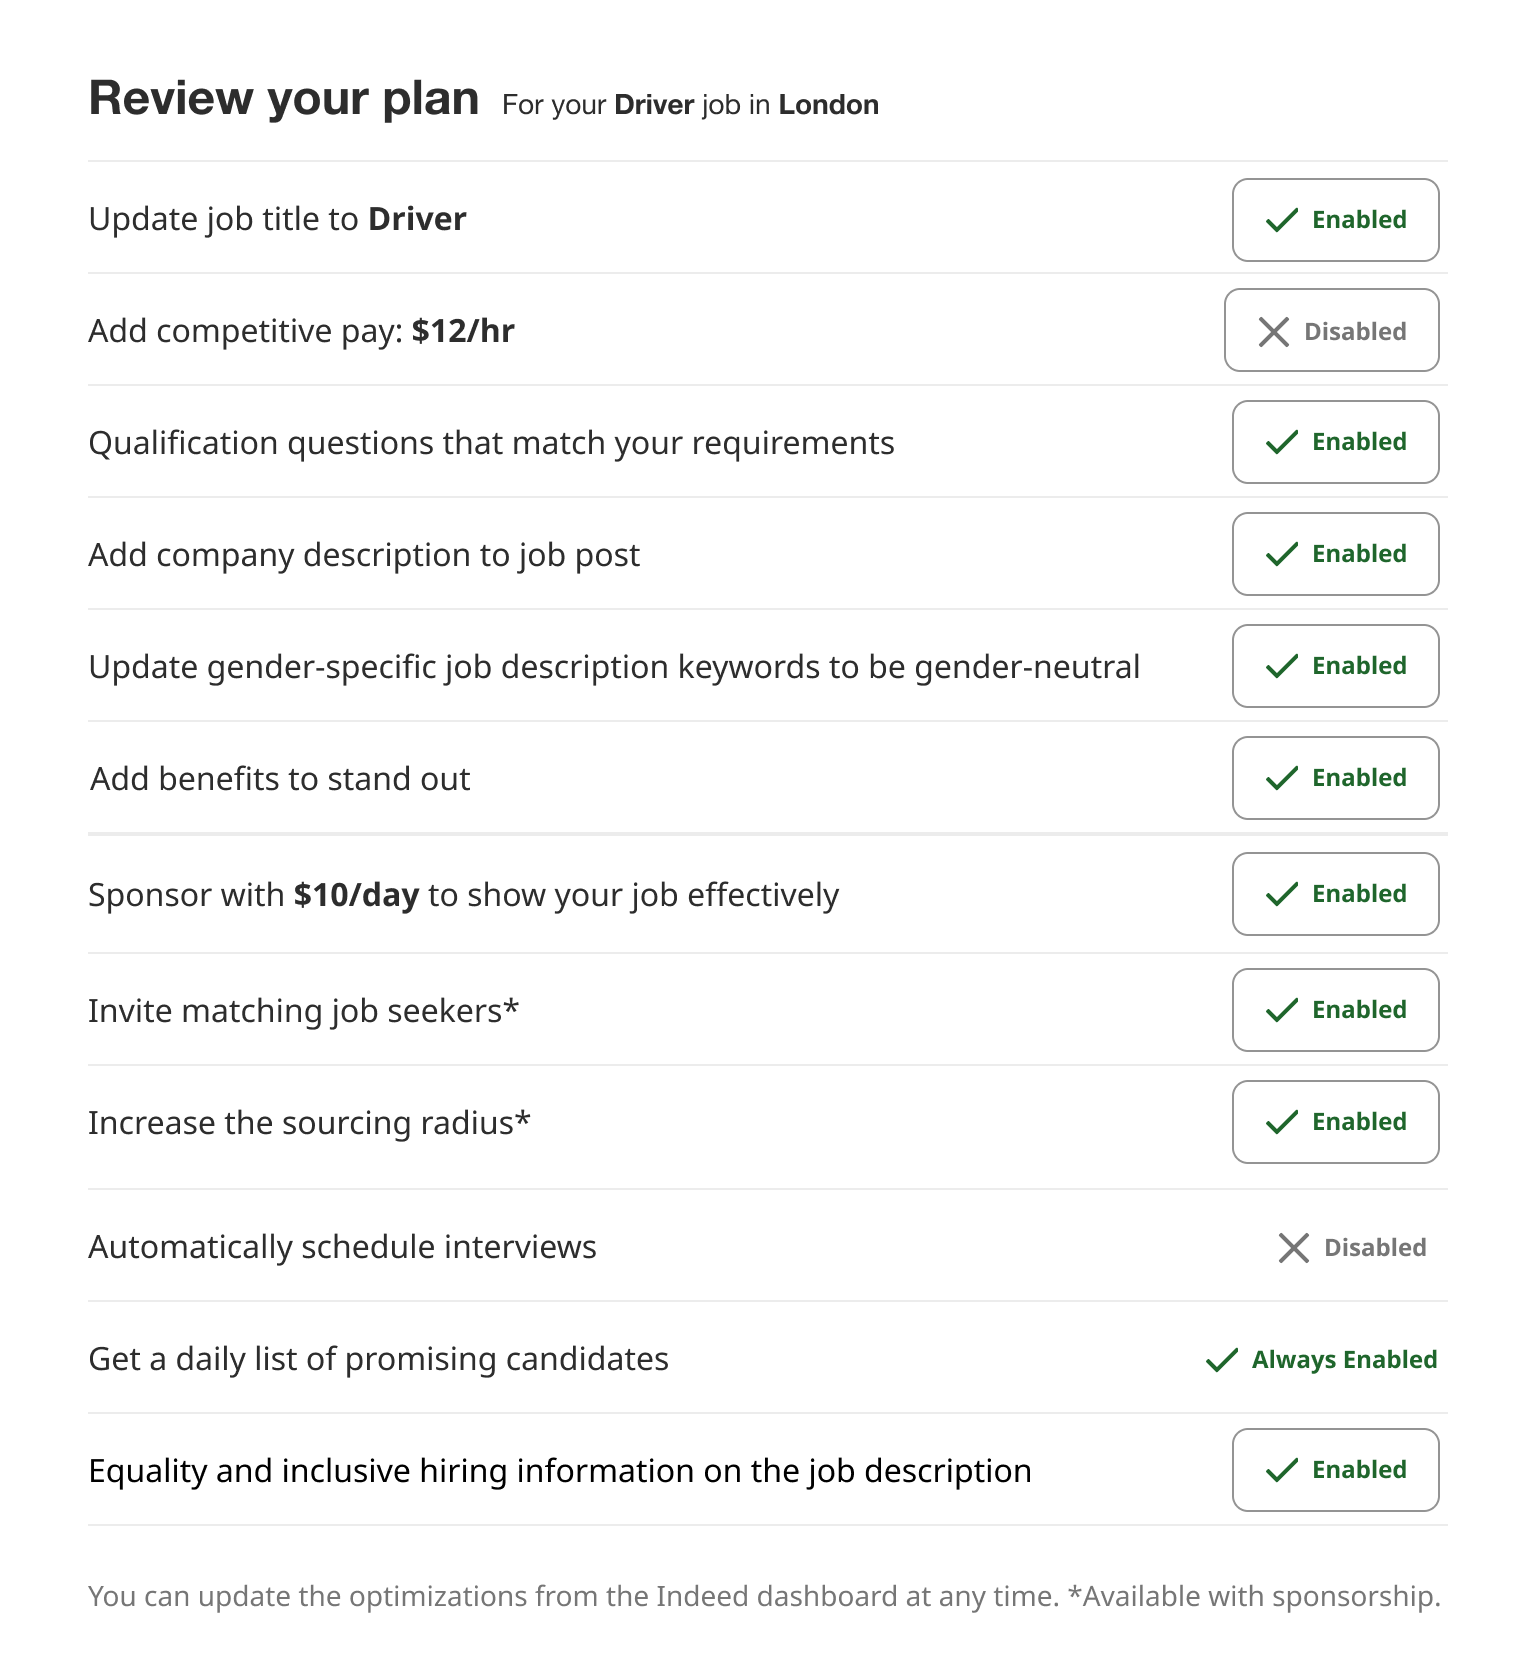 A review page displays options of features Indeed offers when employers post a job. A bold header displays the job title and prompts employers to enable or disable options using buttons on the right of the screen.